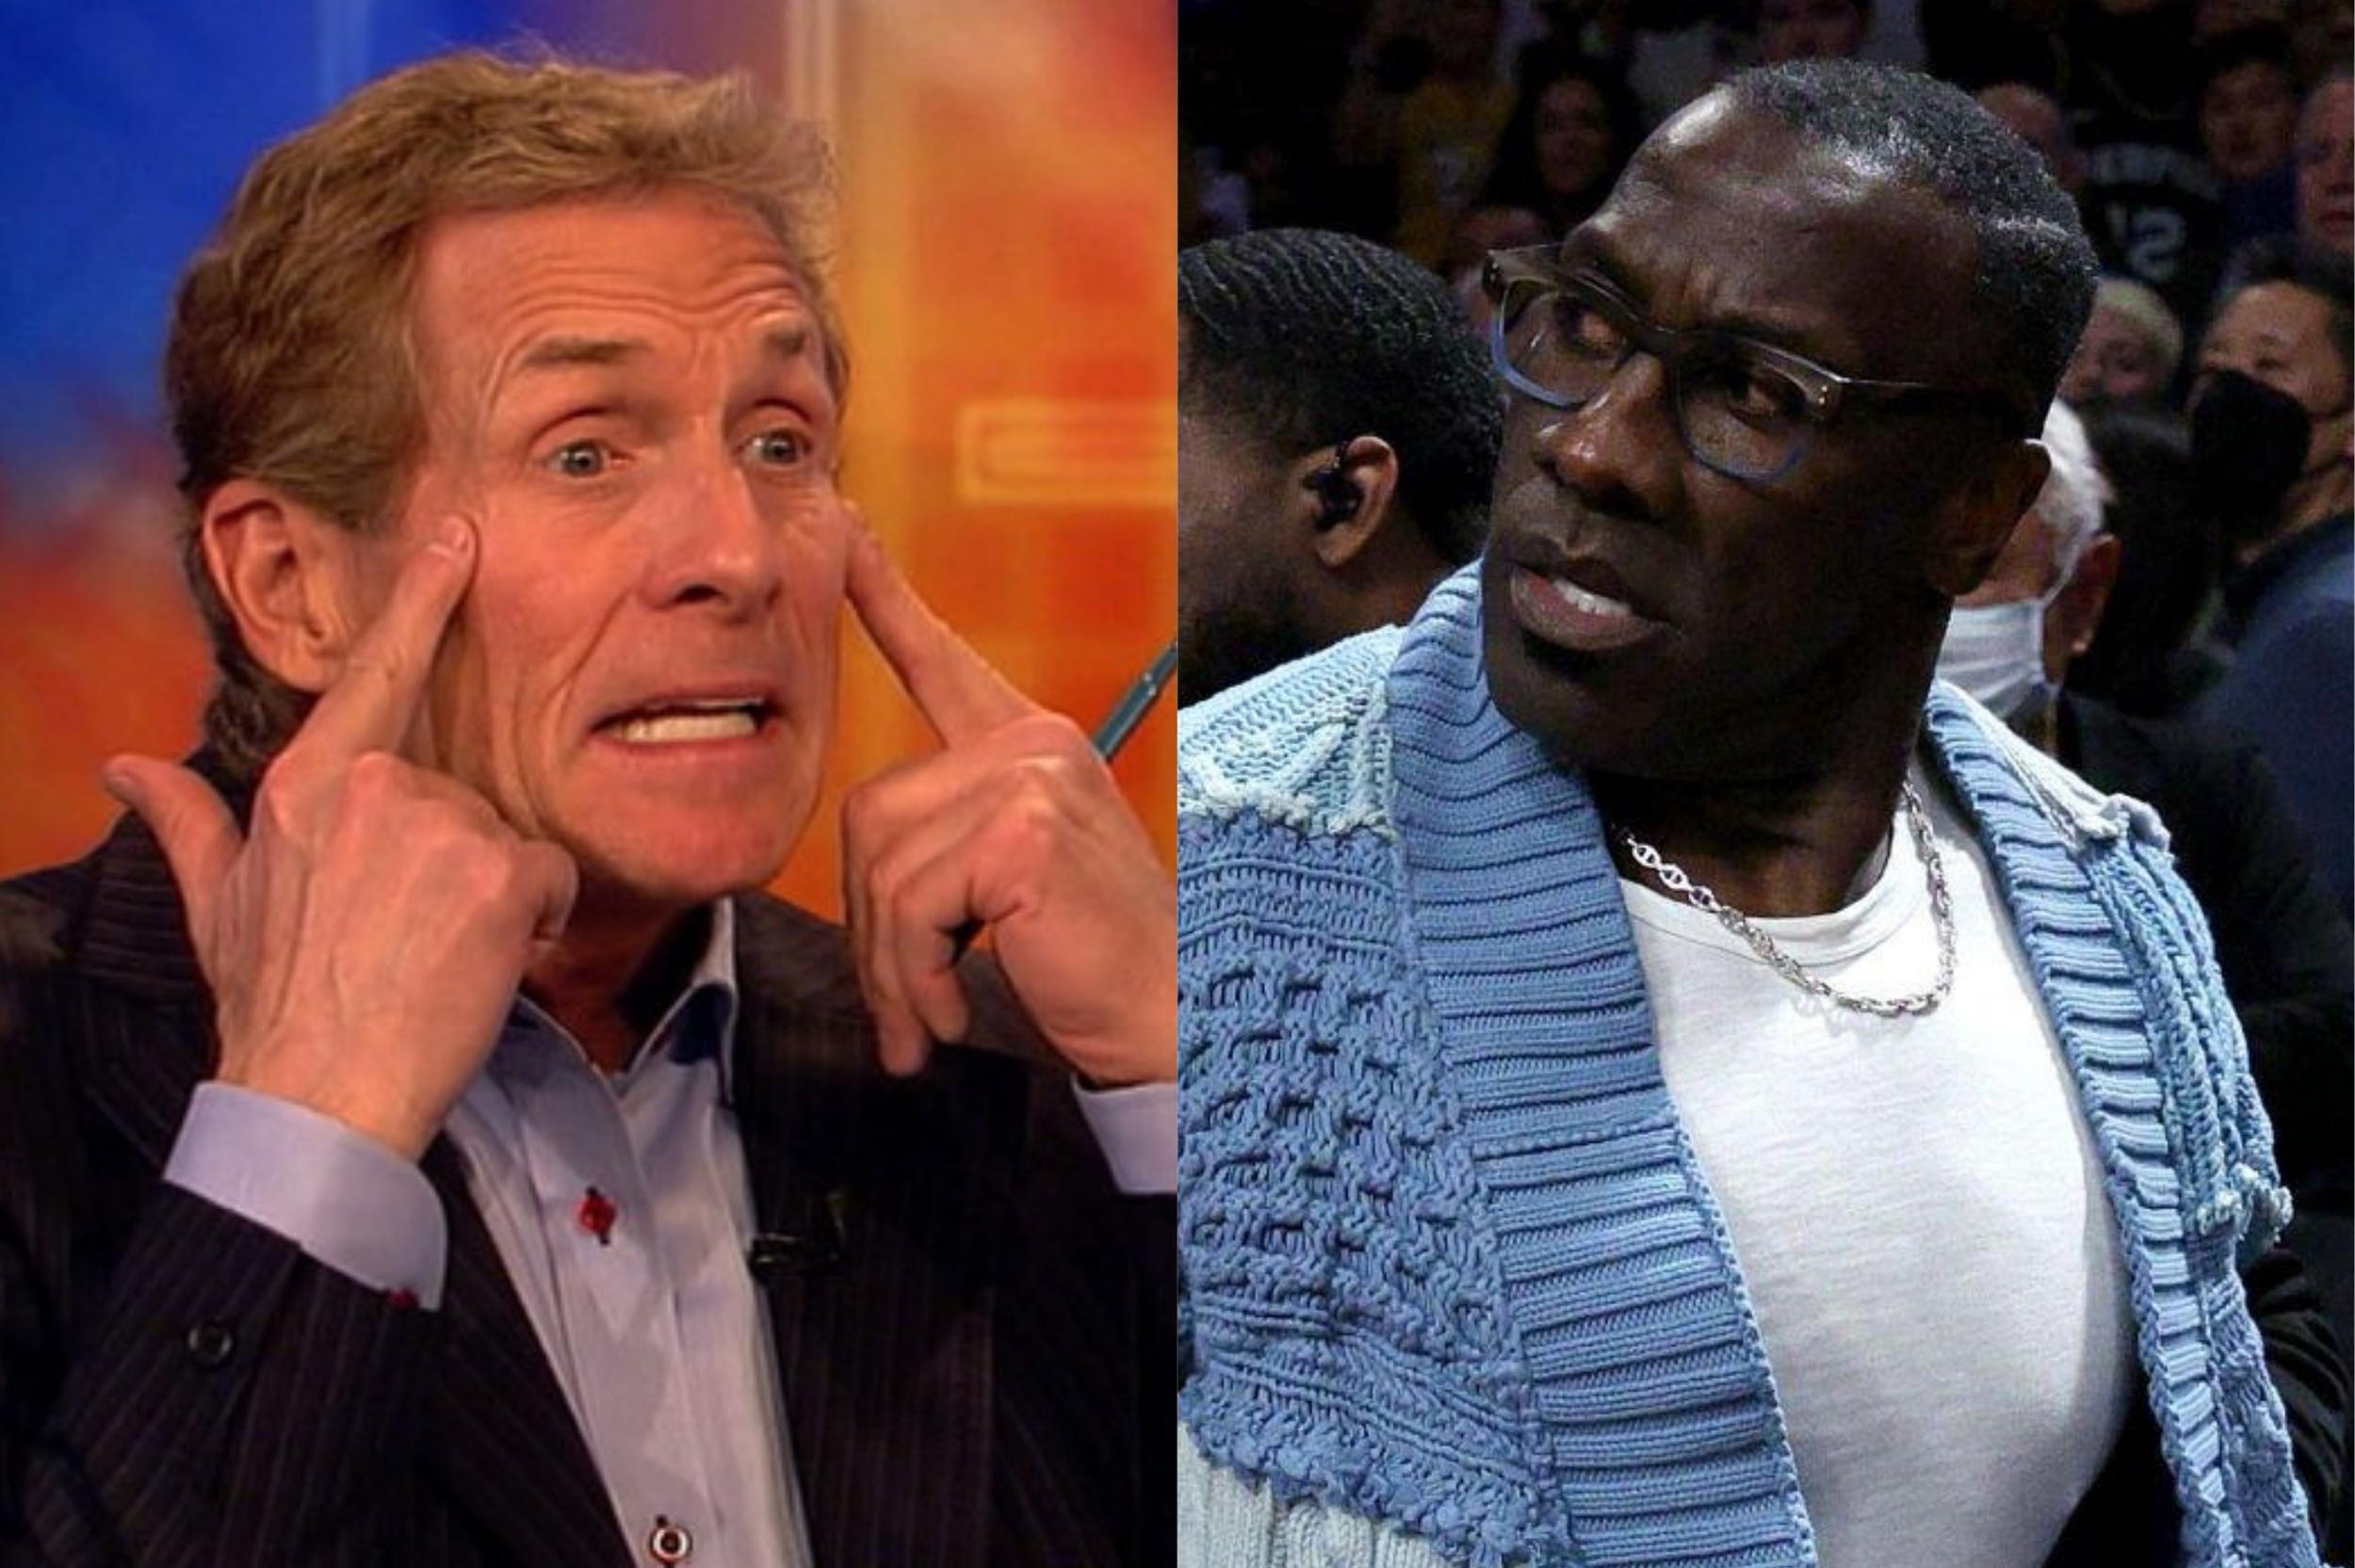 (left) Skip Bayless in a heated argument. (Right) SHannon Sharpe looking back at basketball game.